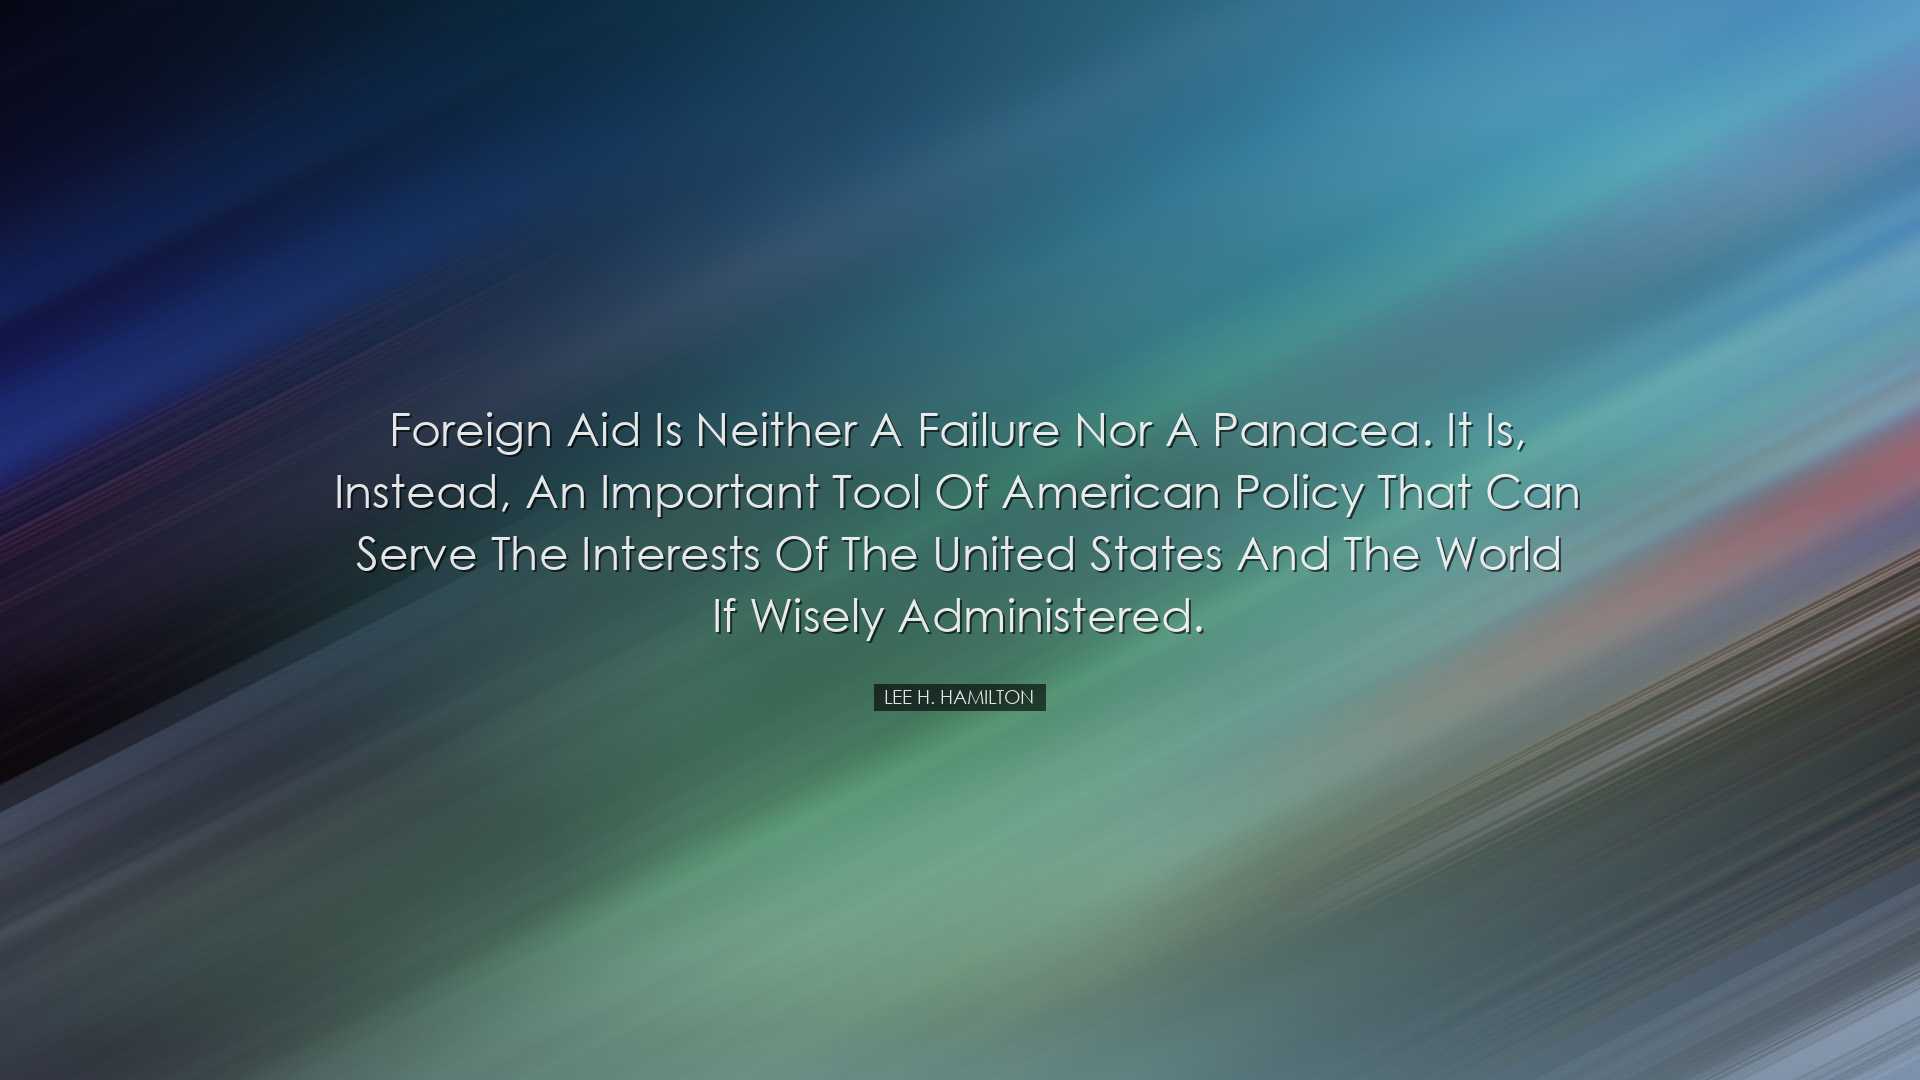 Foreign aid is neither a failure nor a panacea. It is, instead, an